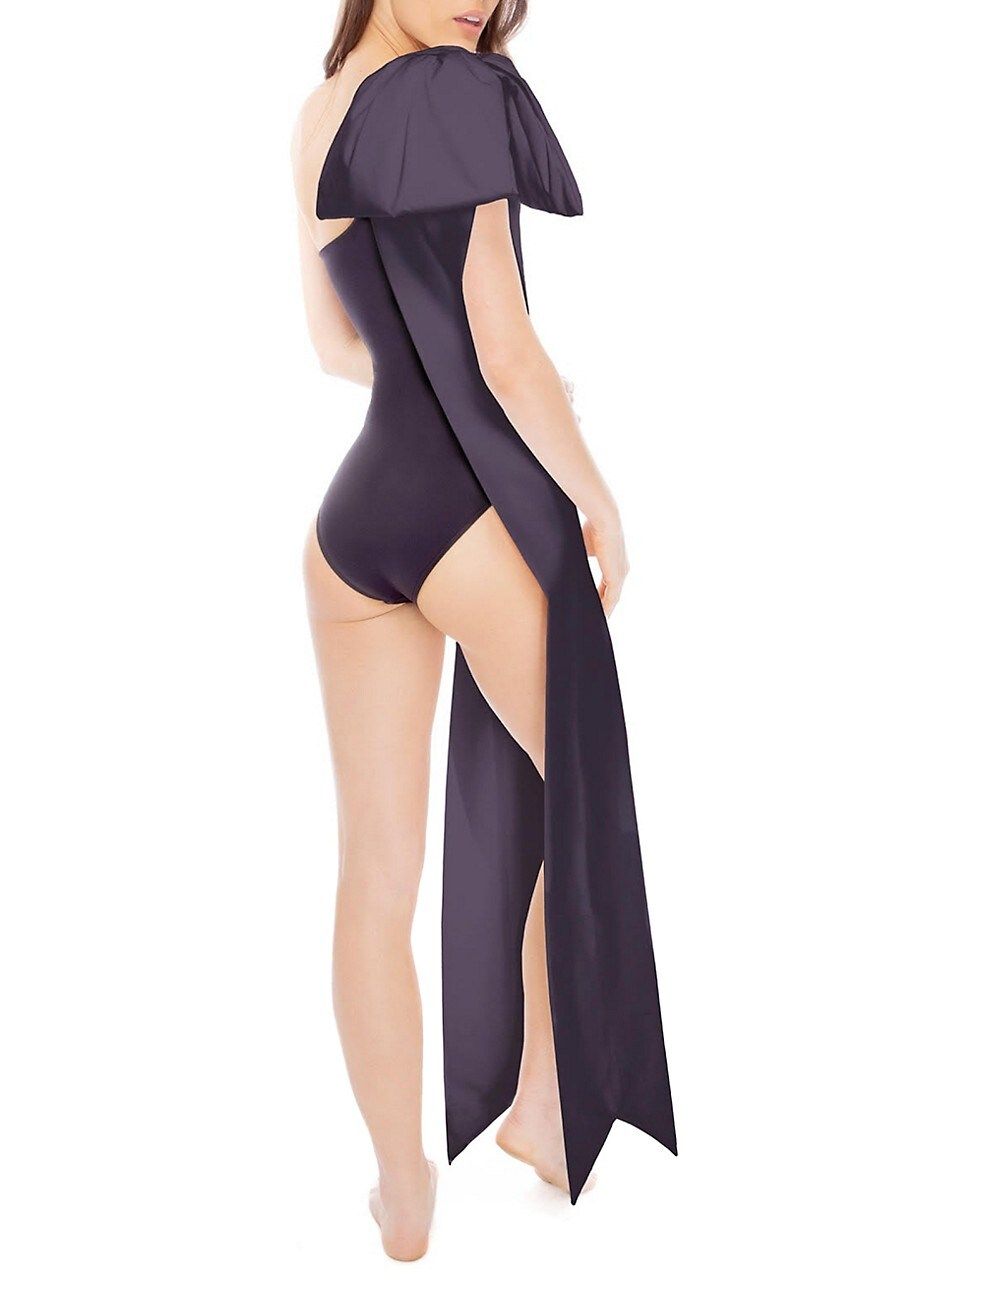 Milly Black With Bow Swimsuit | Saks Fifth Avenue